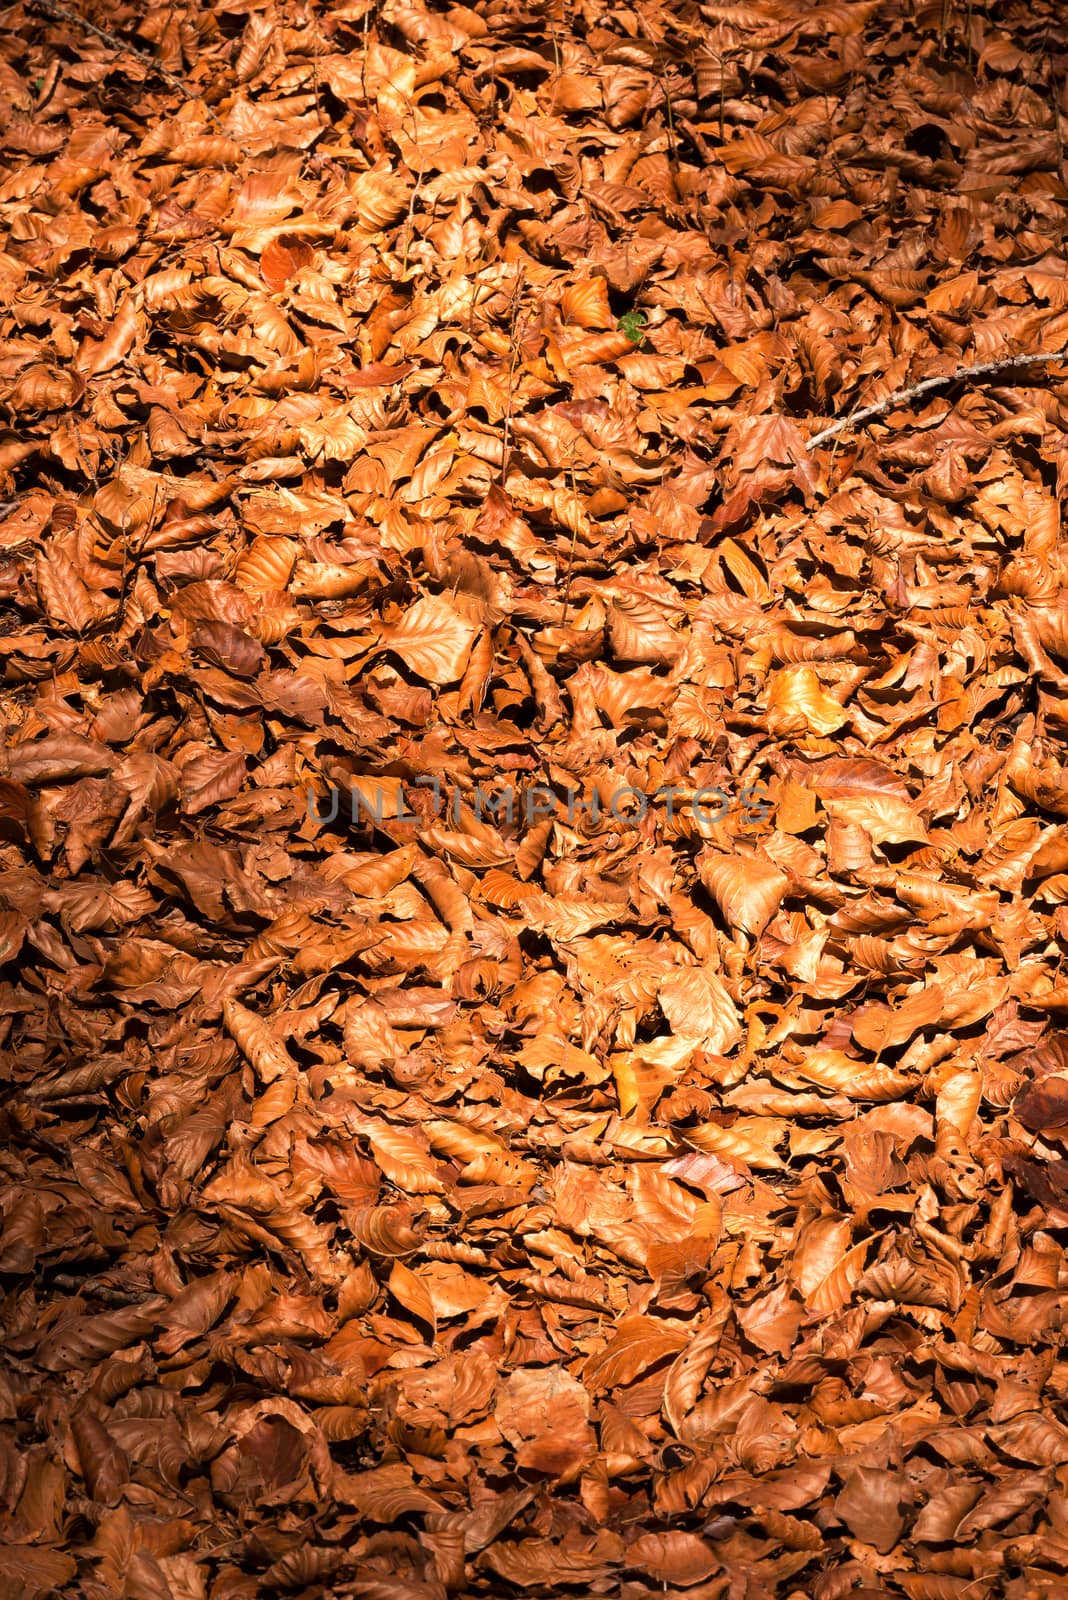 Brown, orange and red autumn leaves on the ground in the undergrowth.